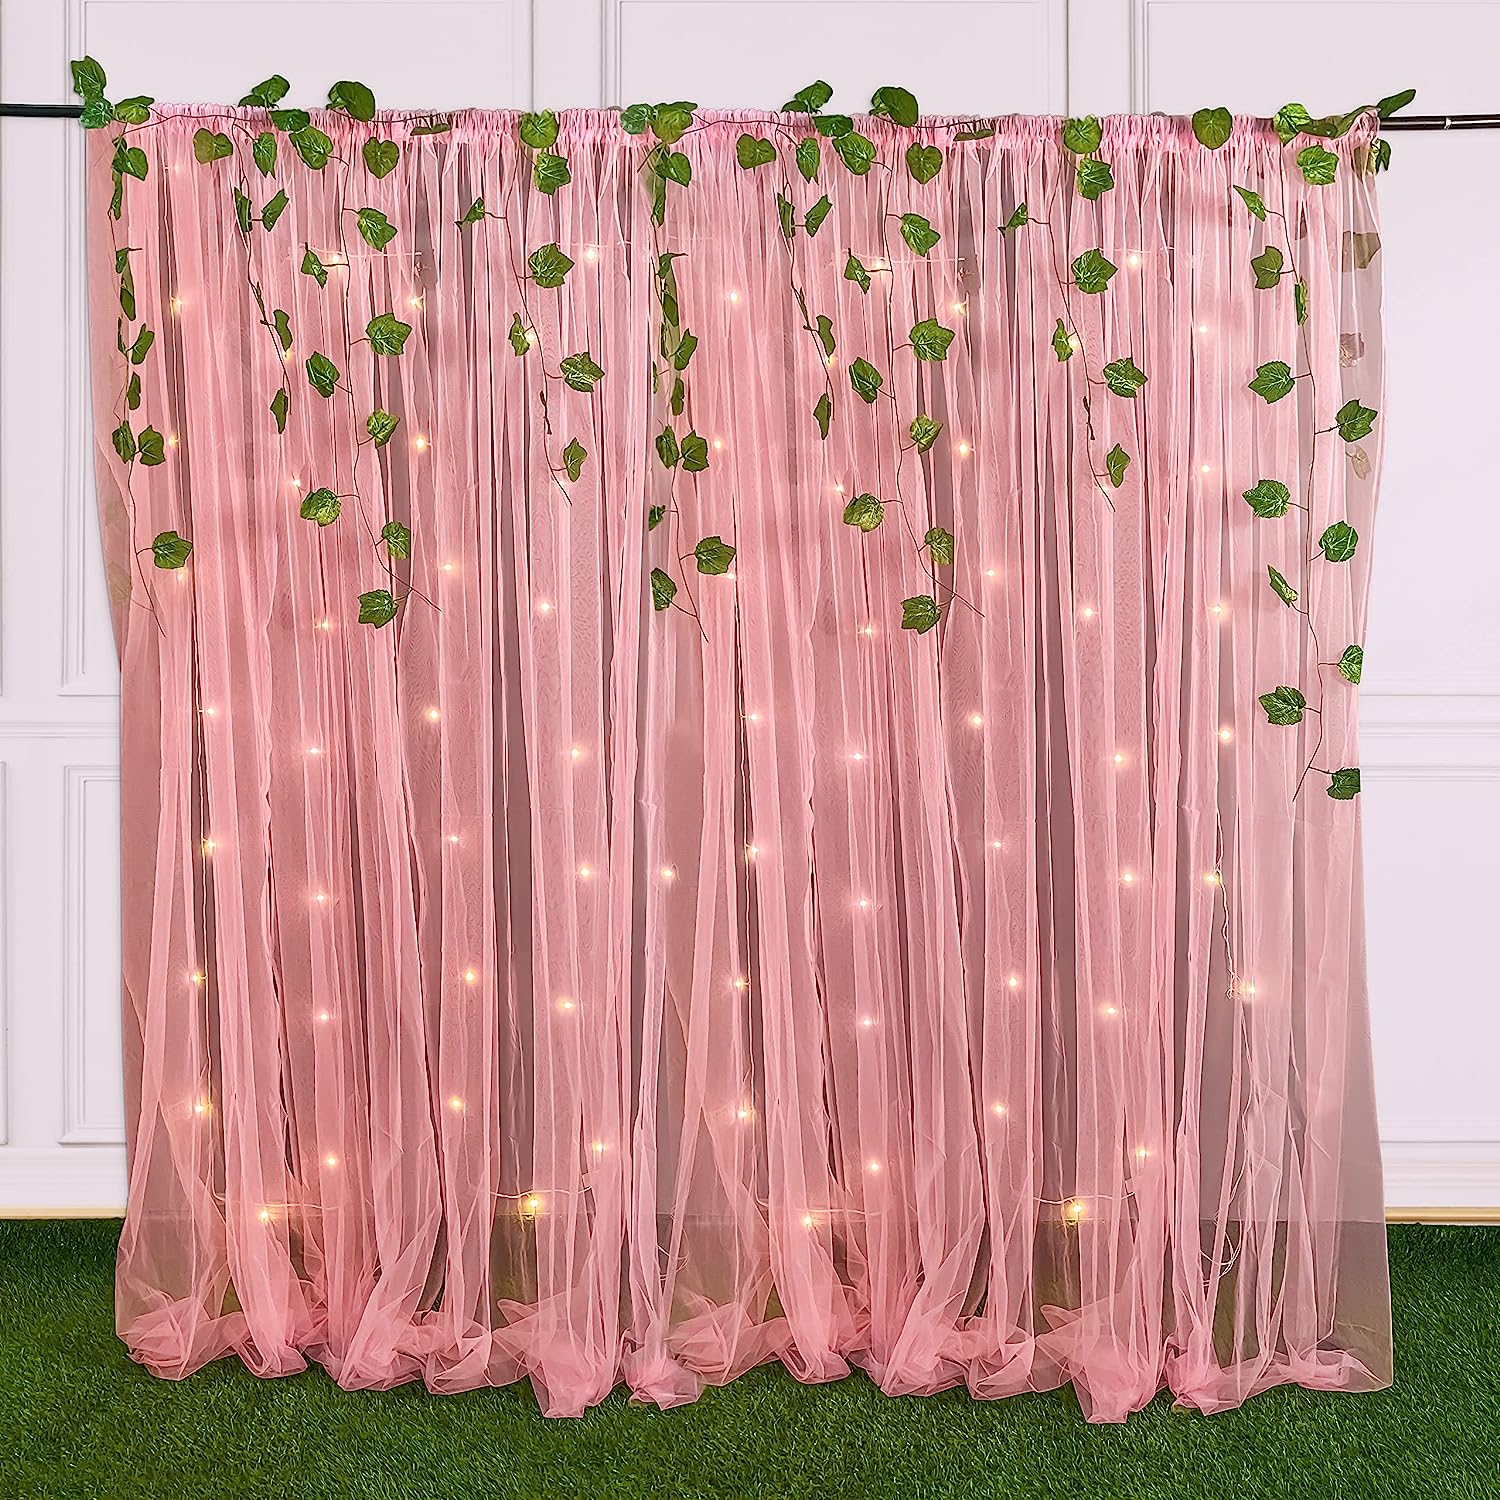 Buy SpecialYou.in 4 Pcs Aesthetic Room Decor Backdrop Fairy Lights